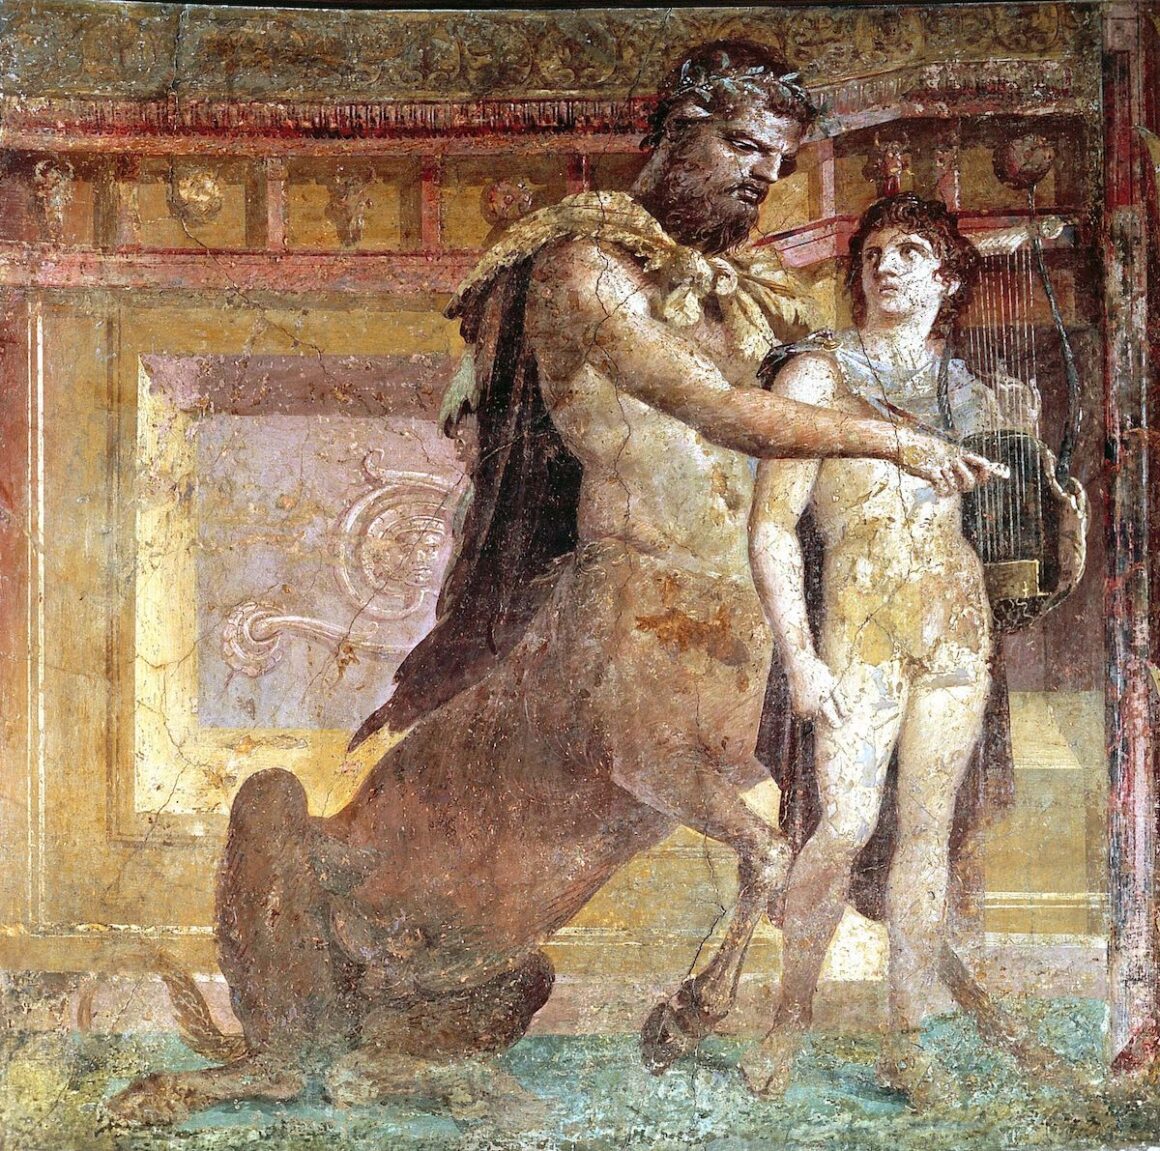 A centaur teaching Achilles how to play the Lyre